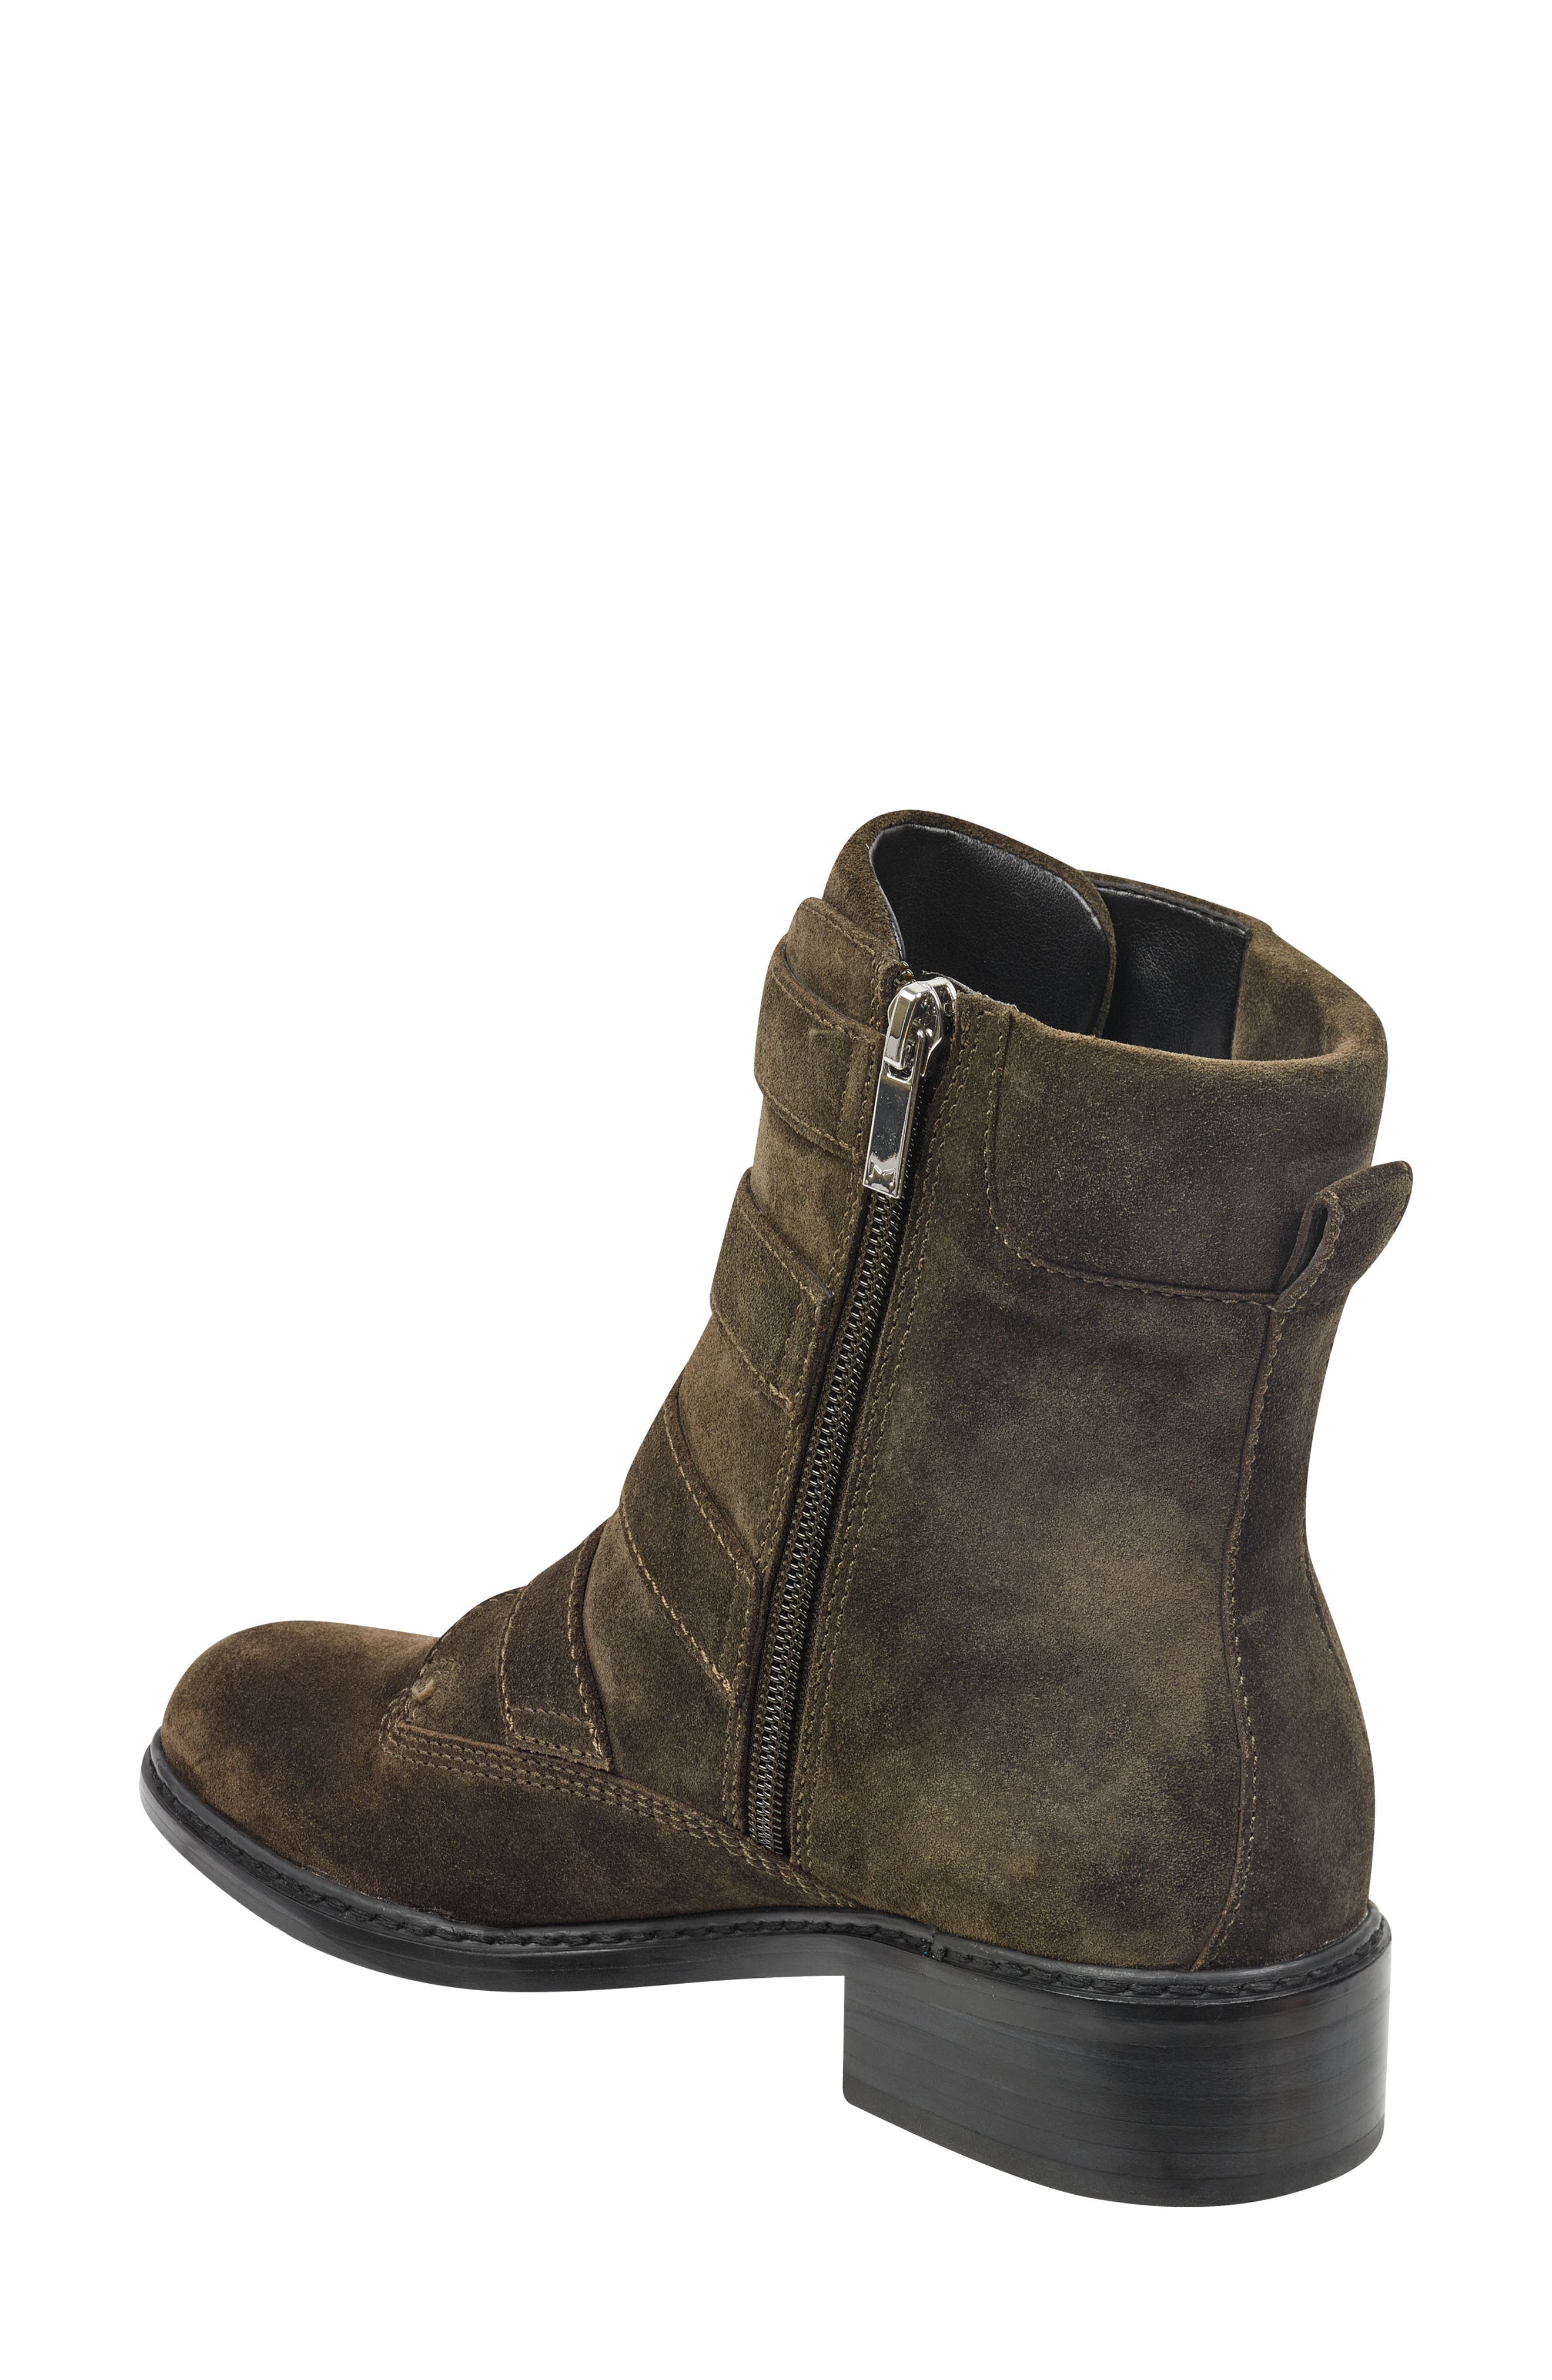 marc fisher diante buckle boot